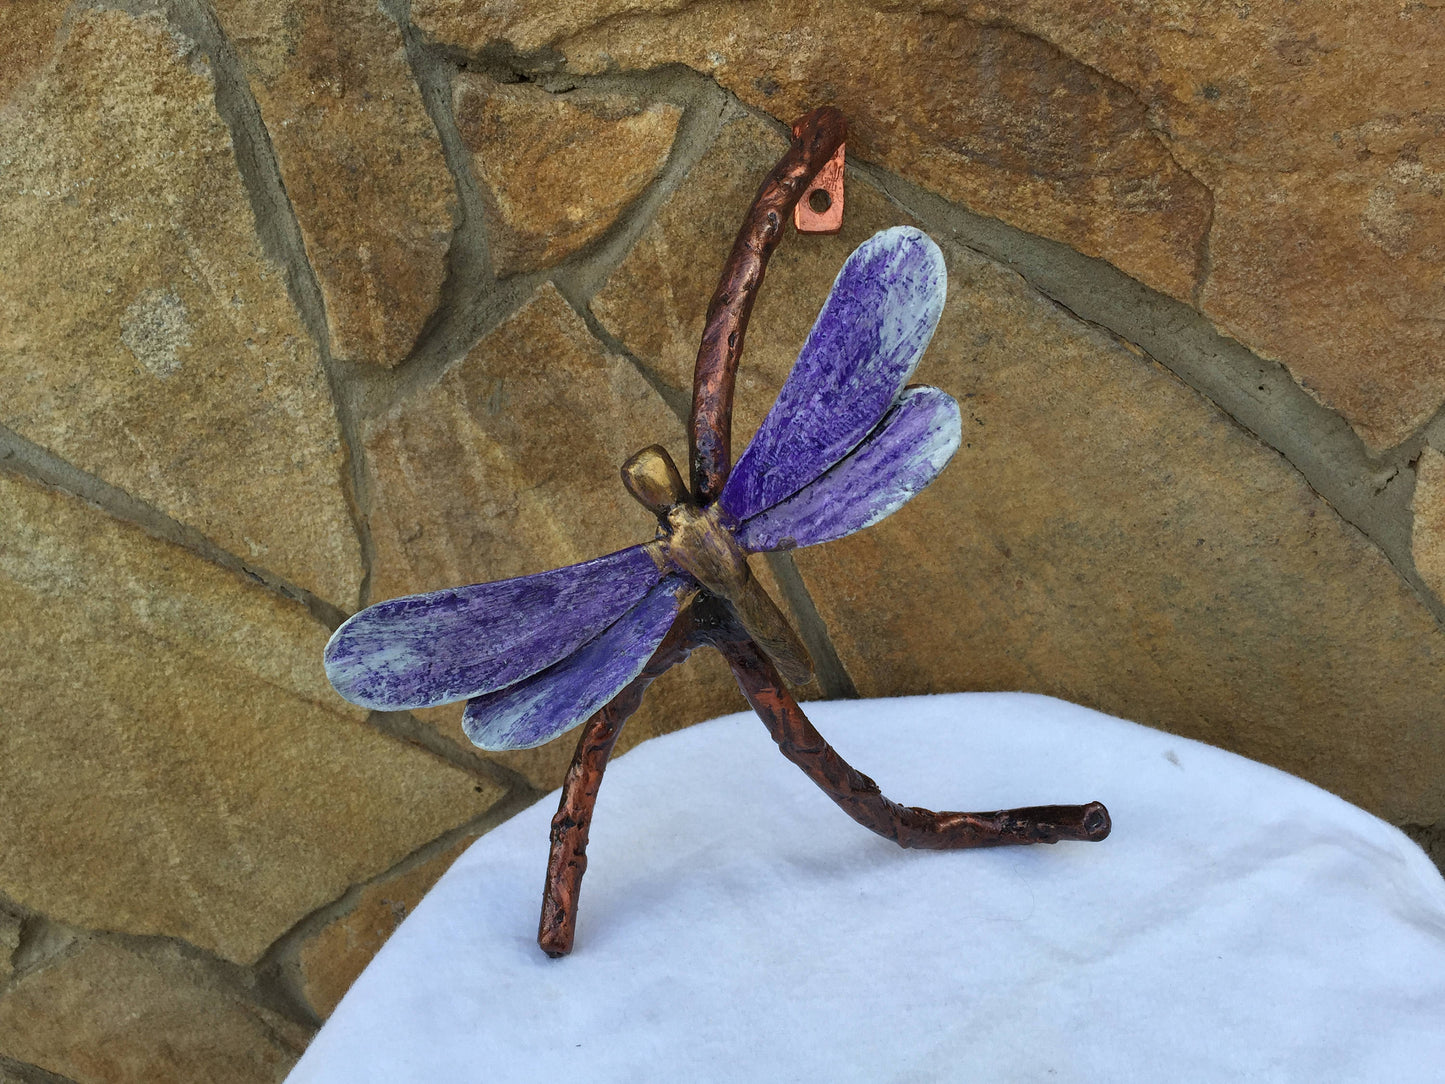 Dragonfly, metal dragonfly, dragonfly figurine, forged dragonfly, metal statue, metal statuette, miniature statuette, nature, insect, art